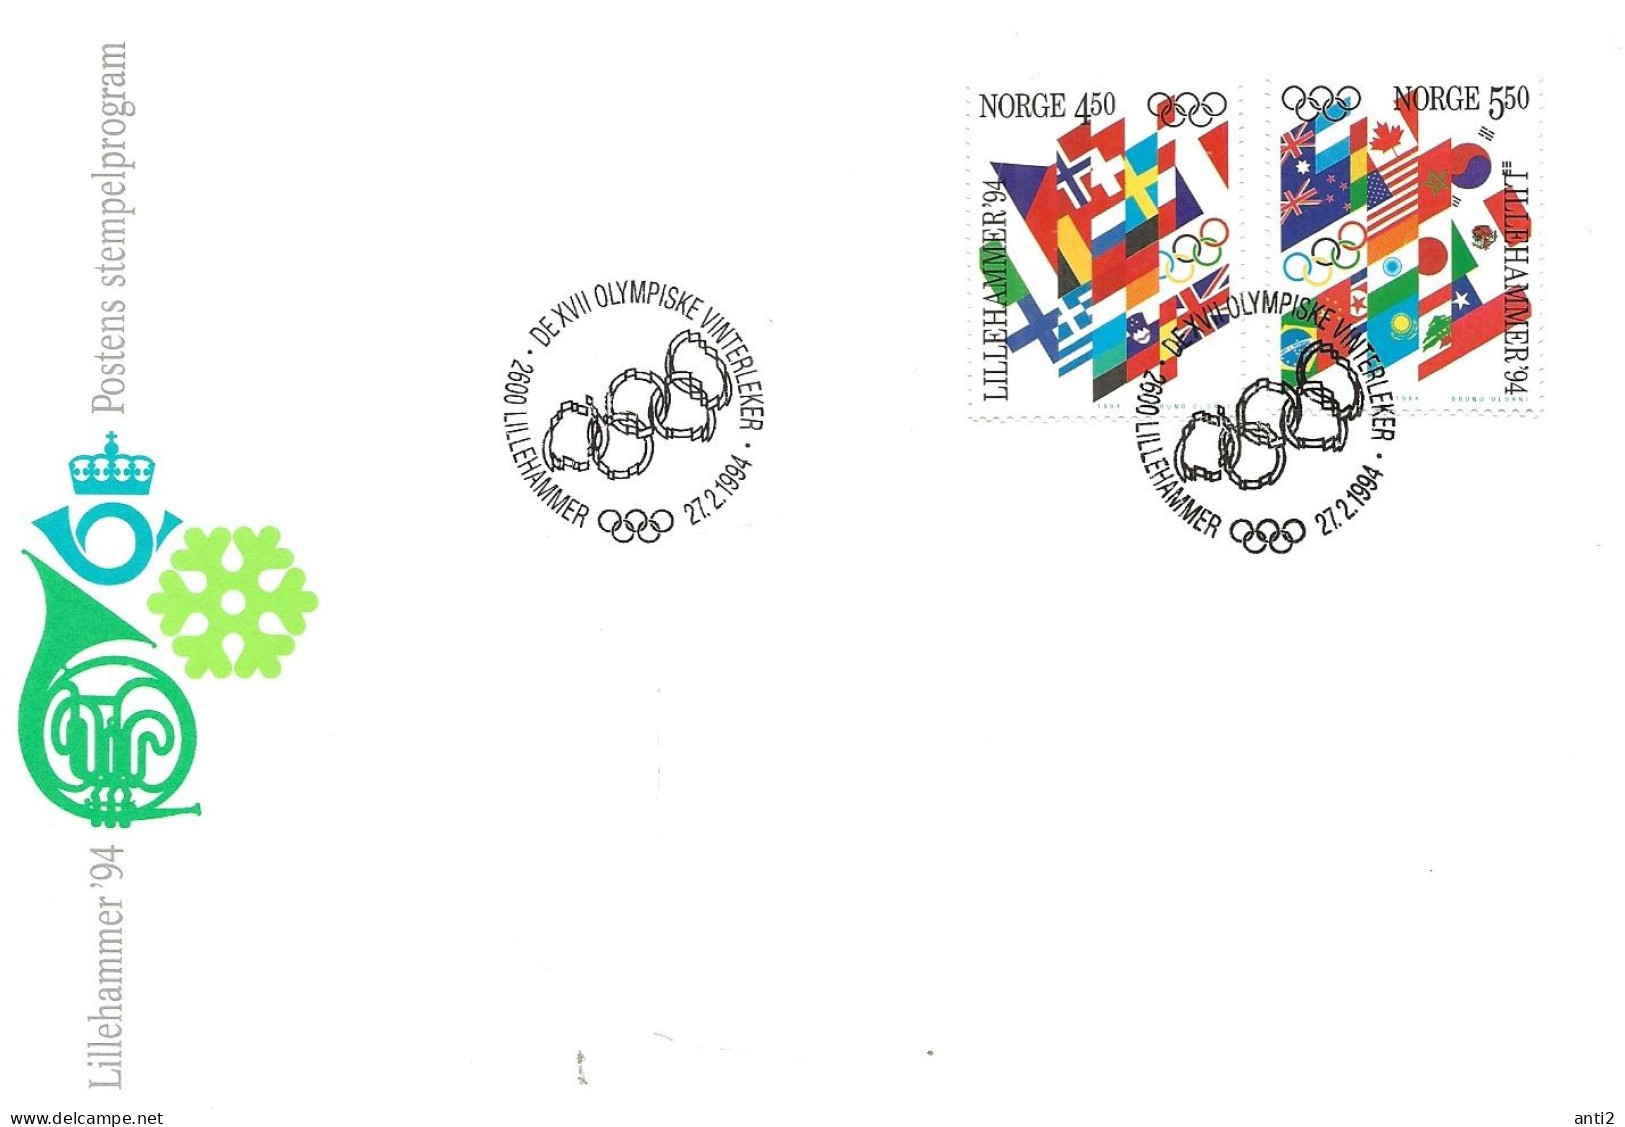 Norway Norge 1994 Olympic Winter Games Lillehammer 1994, Flags Mi 1145-1146 Cover Cancelled 7.2.1994 - Covers & Documents